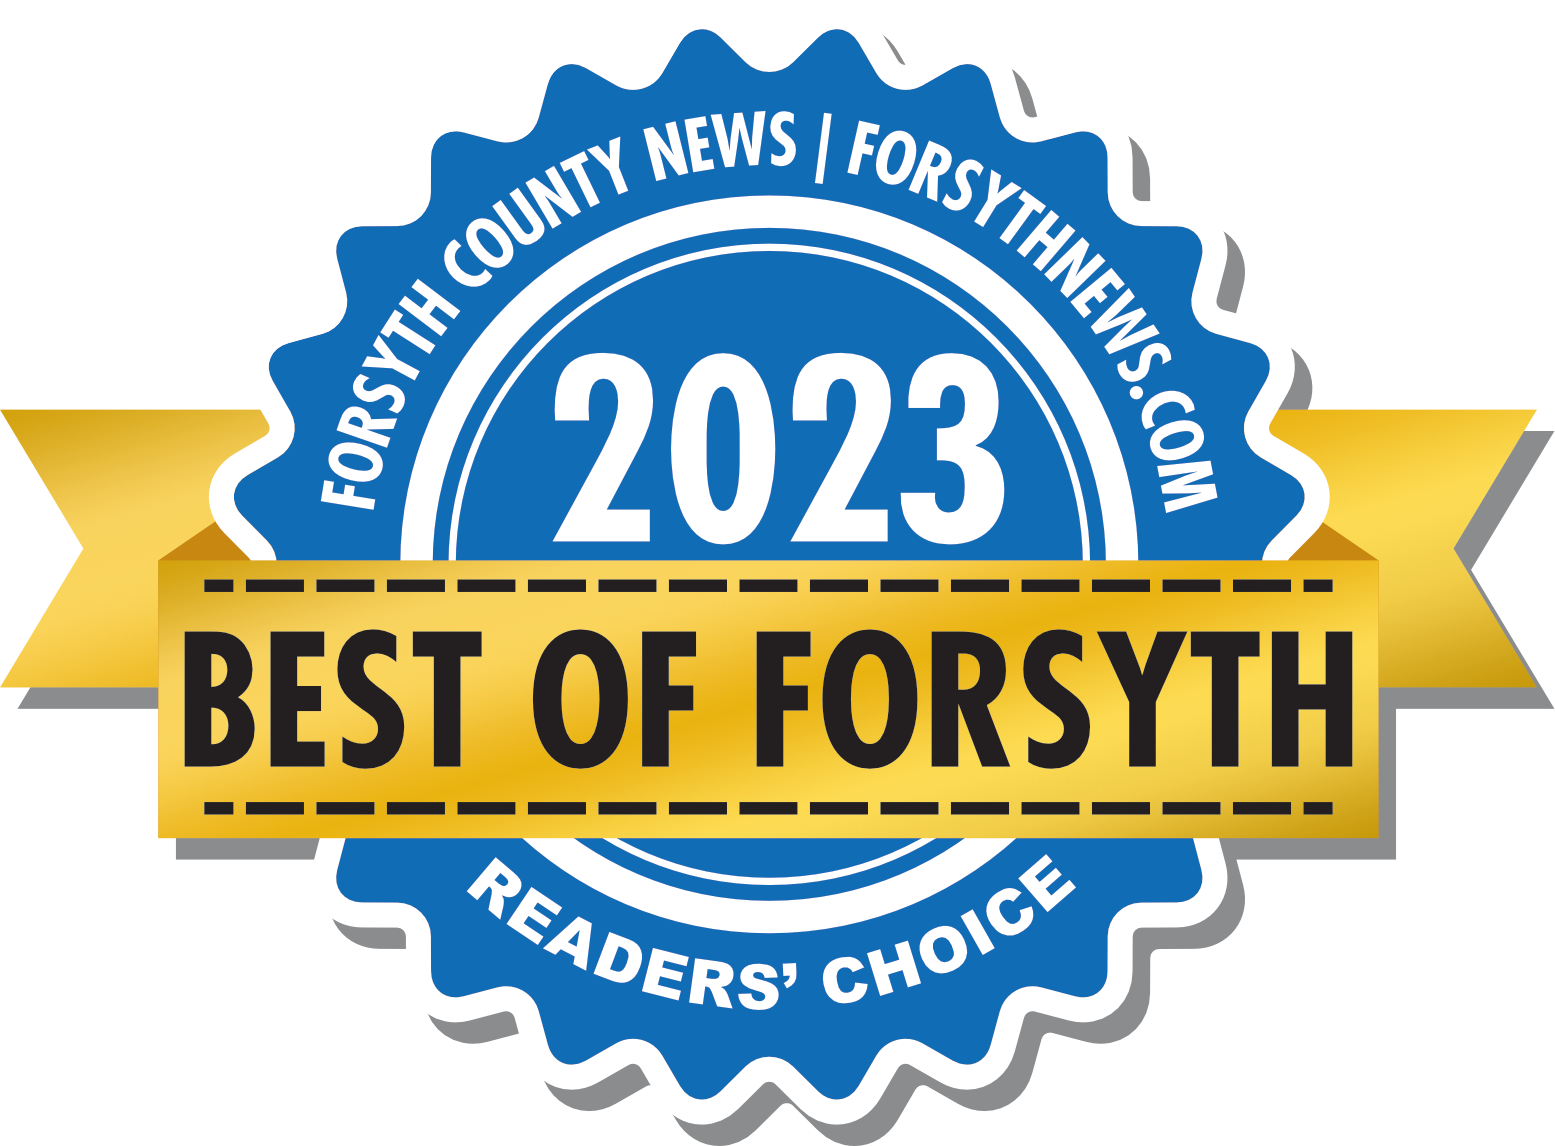 Best of Forsyth County News 2023.